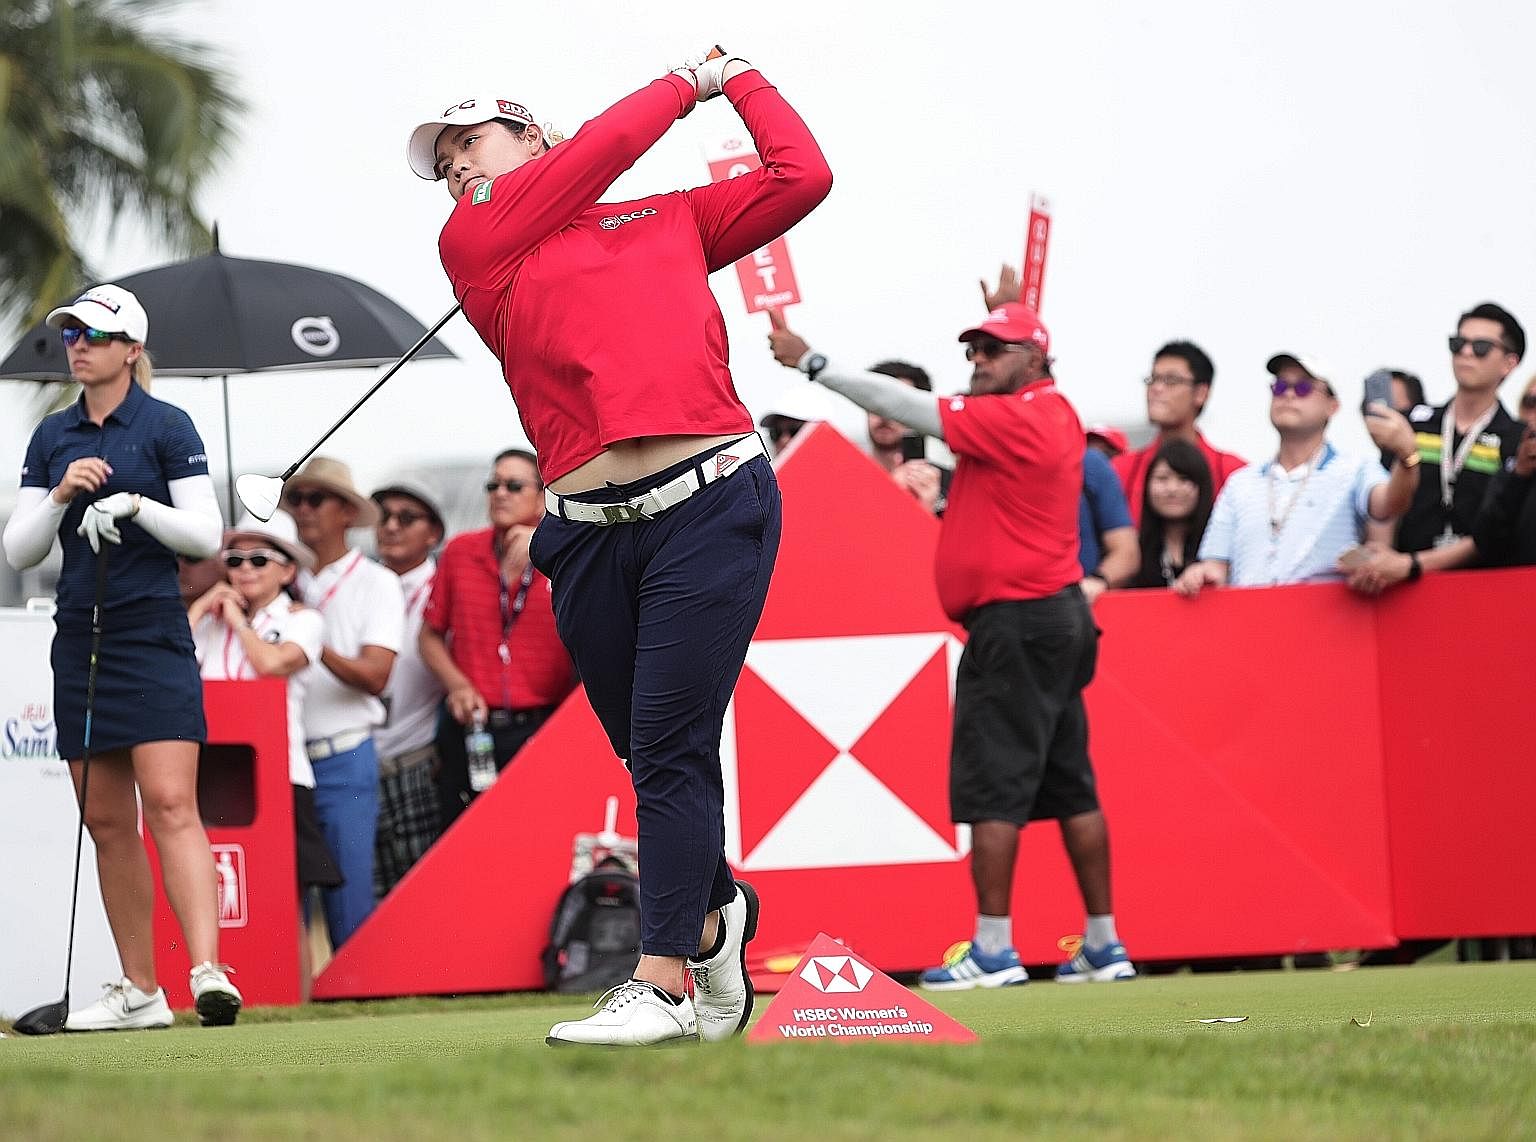 Thailand's Ariya Jutanugarn carded a six-under 66 yesterday to take a one-shot lead at the Sentosa Golf Club's New Tanjong Course. The world No. 1 had won nine of her 11 pro titles as the third-round leader.